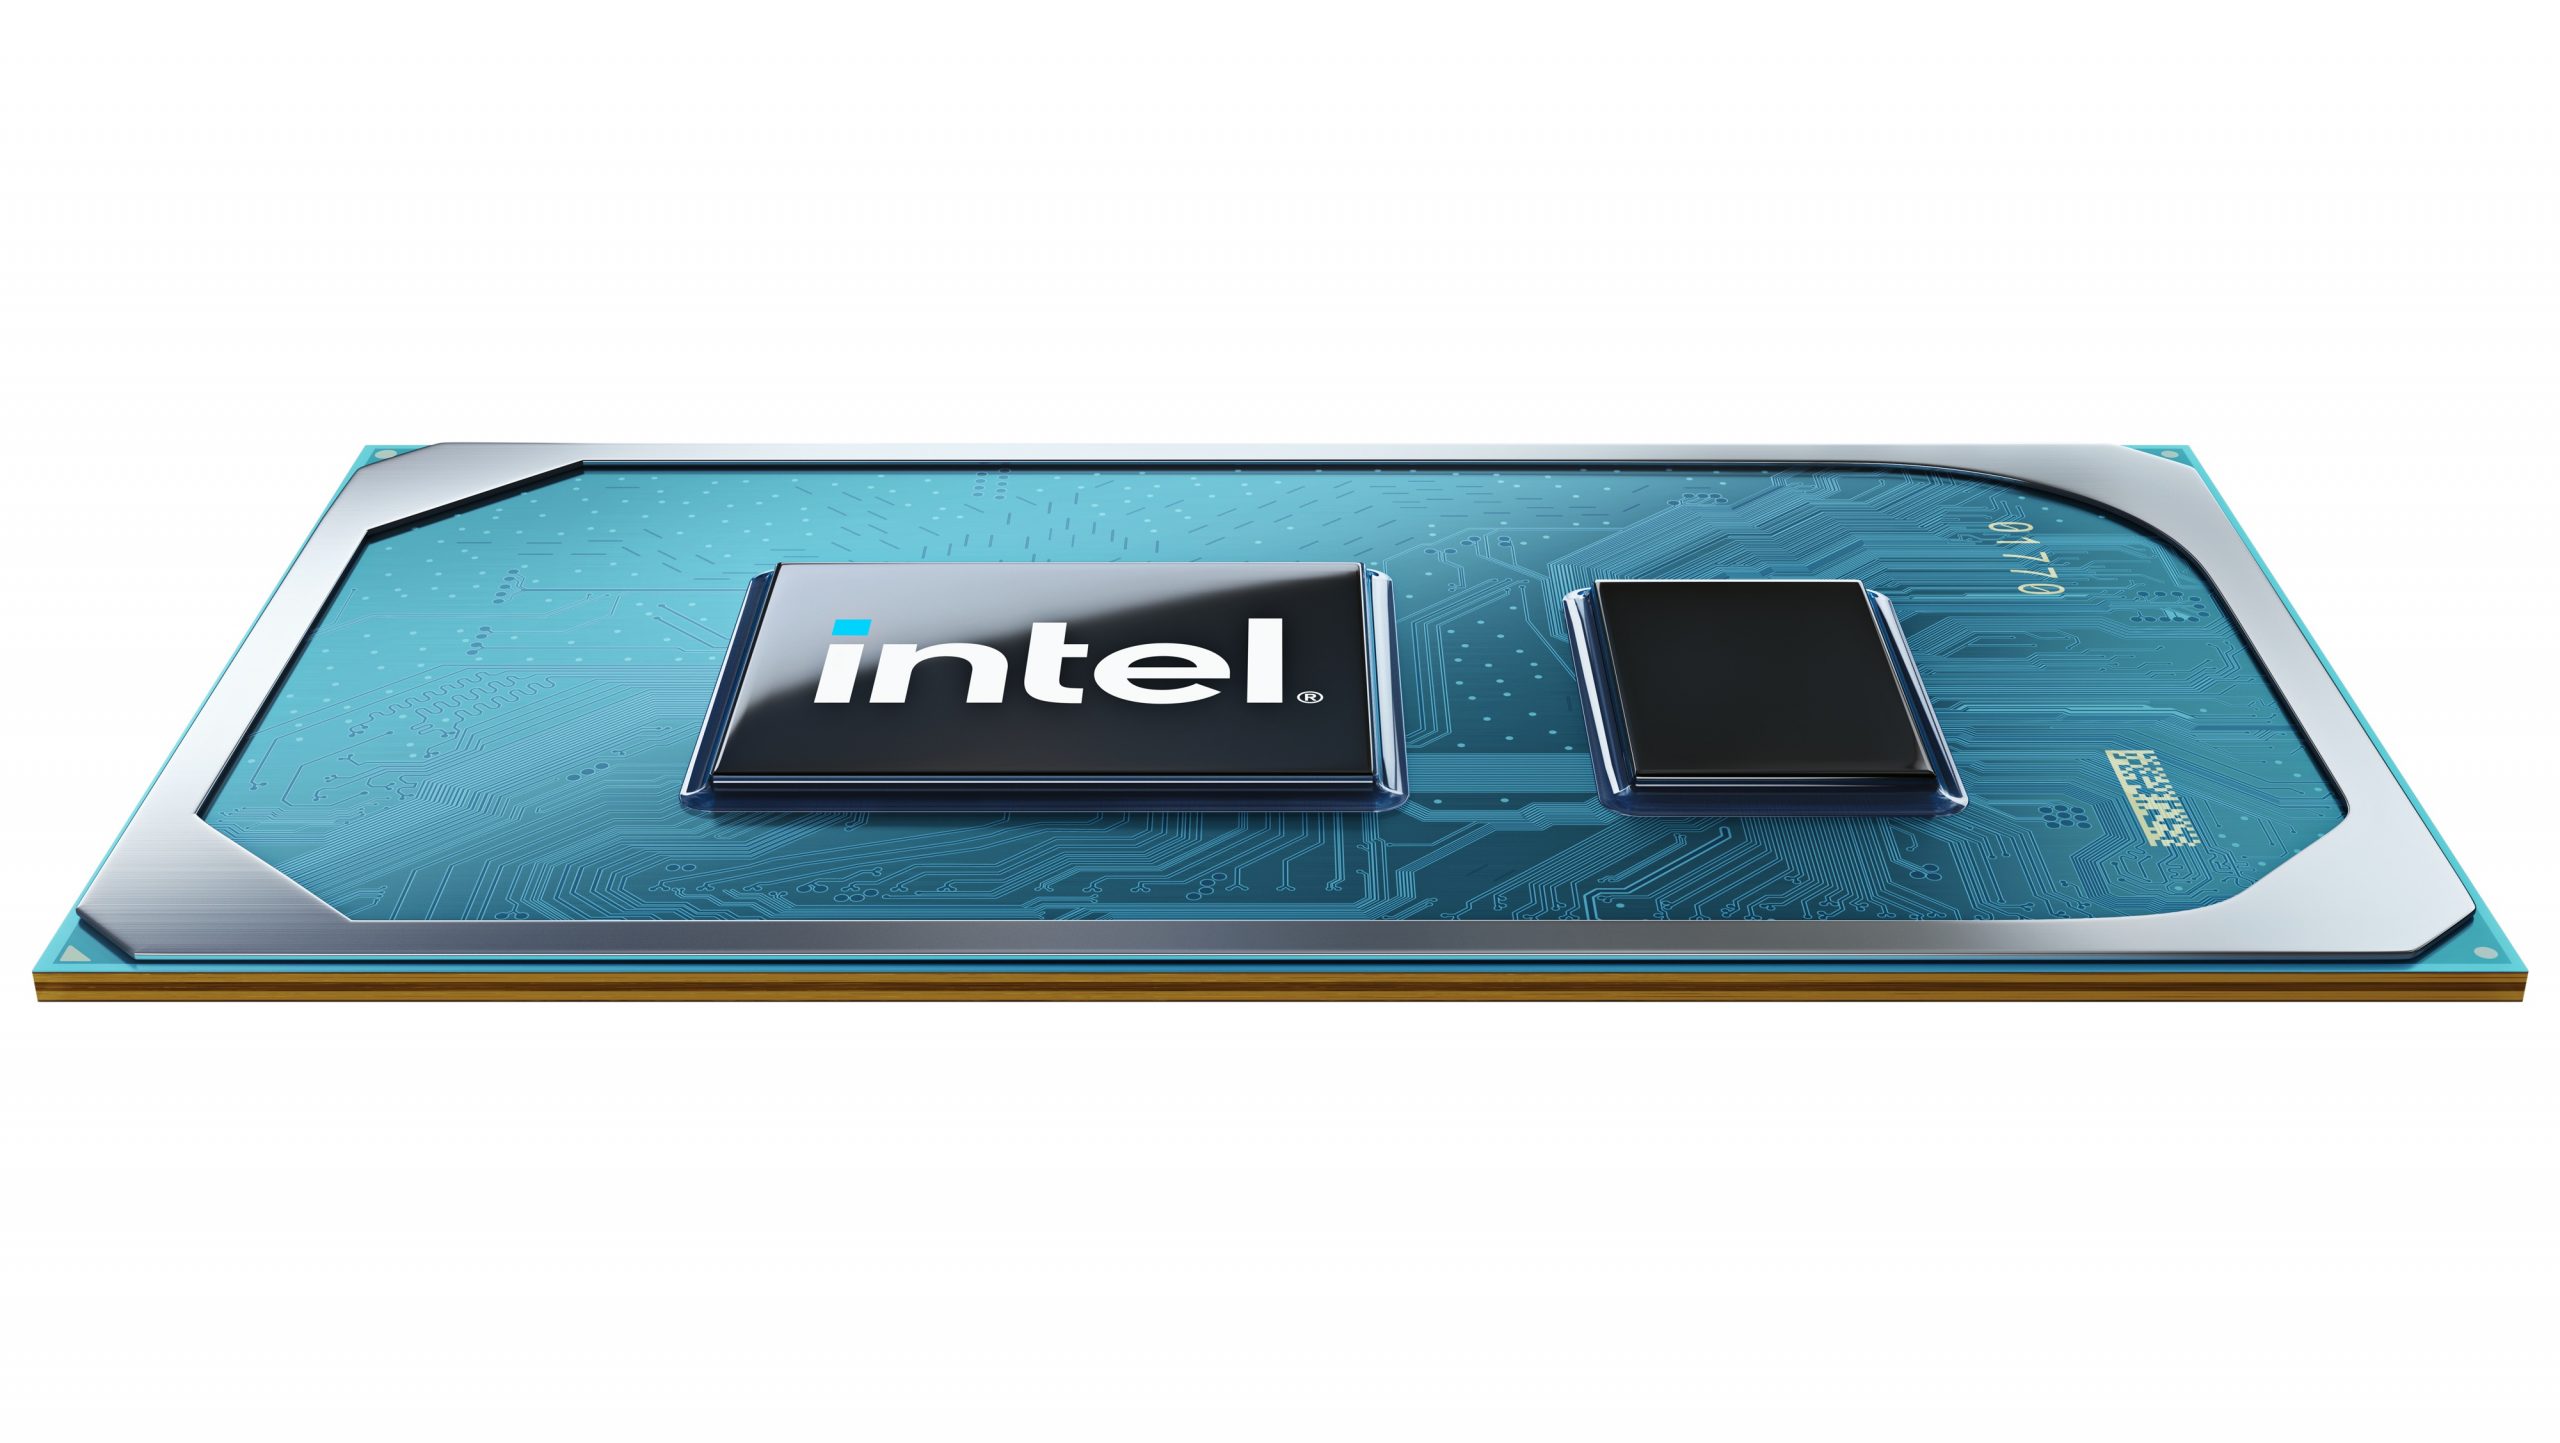 11th Gen Intel Core processors with Intel Iris Xe graphics v2 scaled